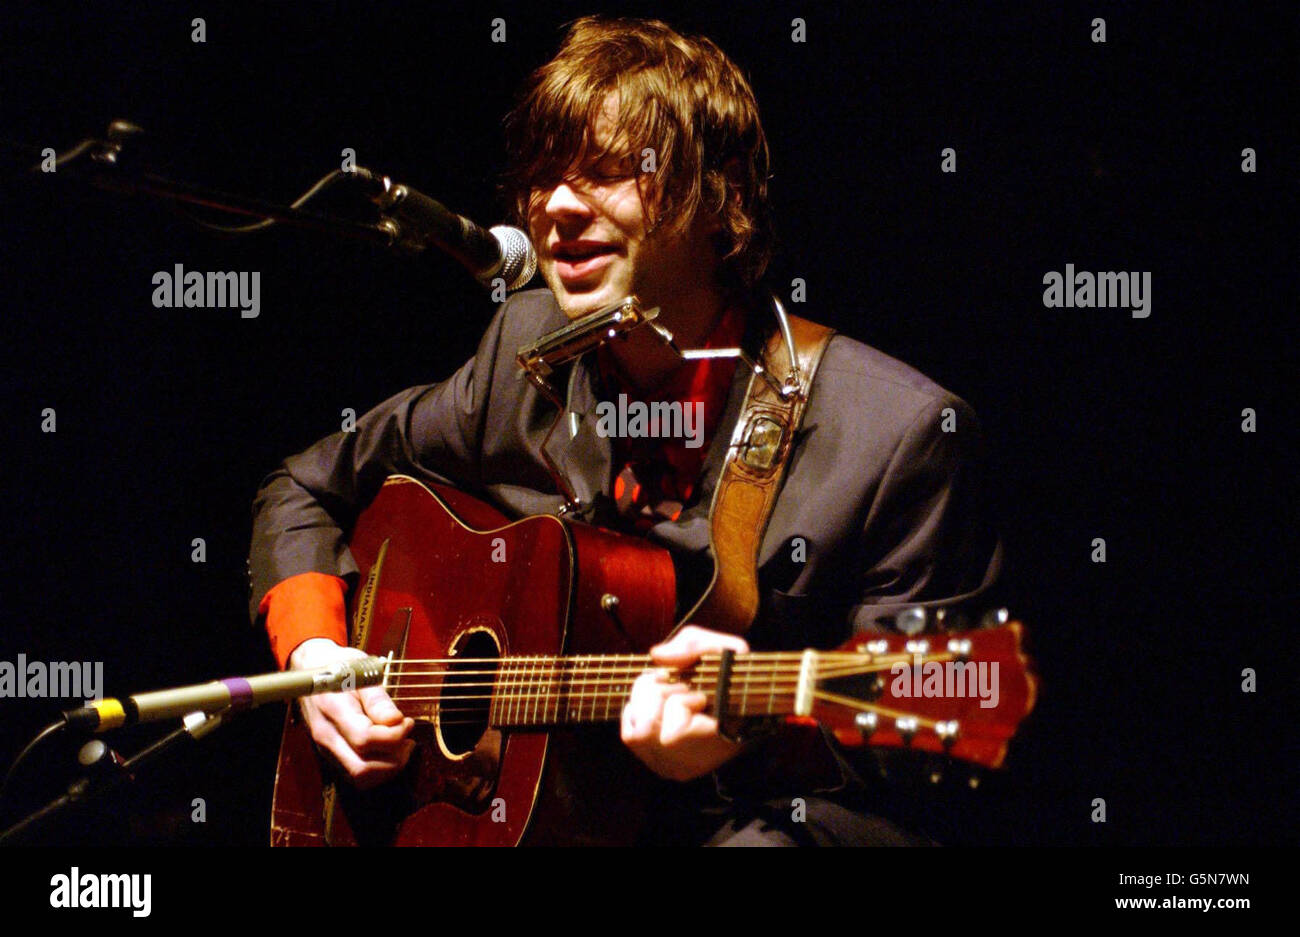 4,614 Ryan Adams Photos & High Res Pictures - Getty Images